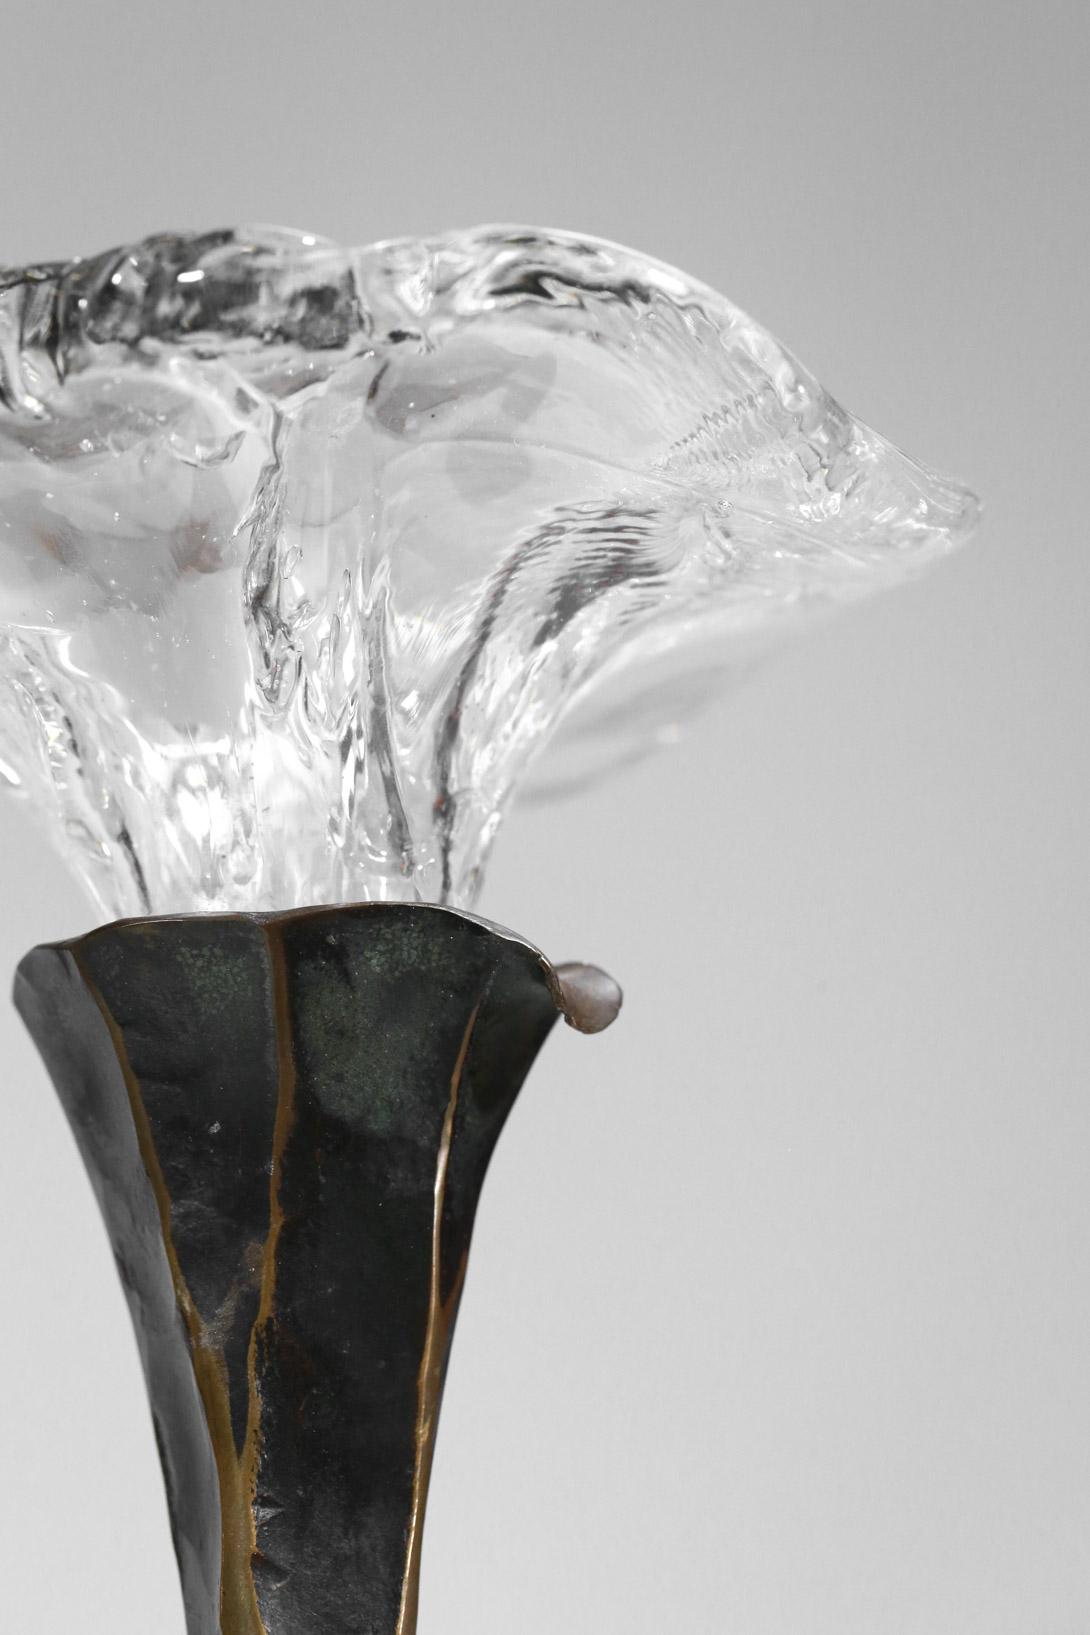 Bronze candleholder designed by the German artist Lothar Klute.
Bronze structure and glass diffuser.